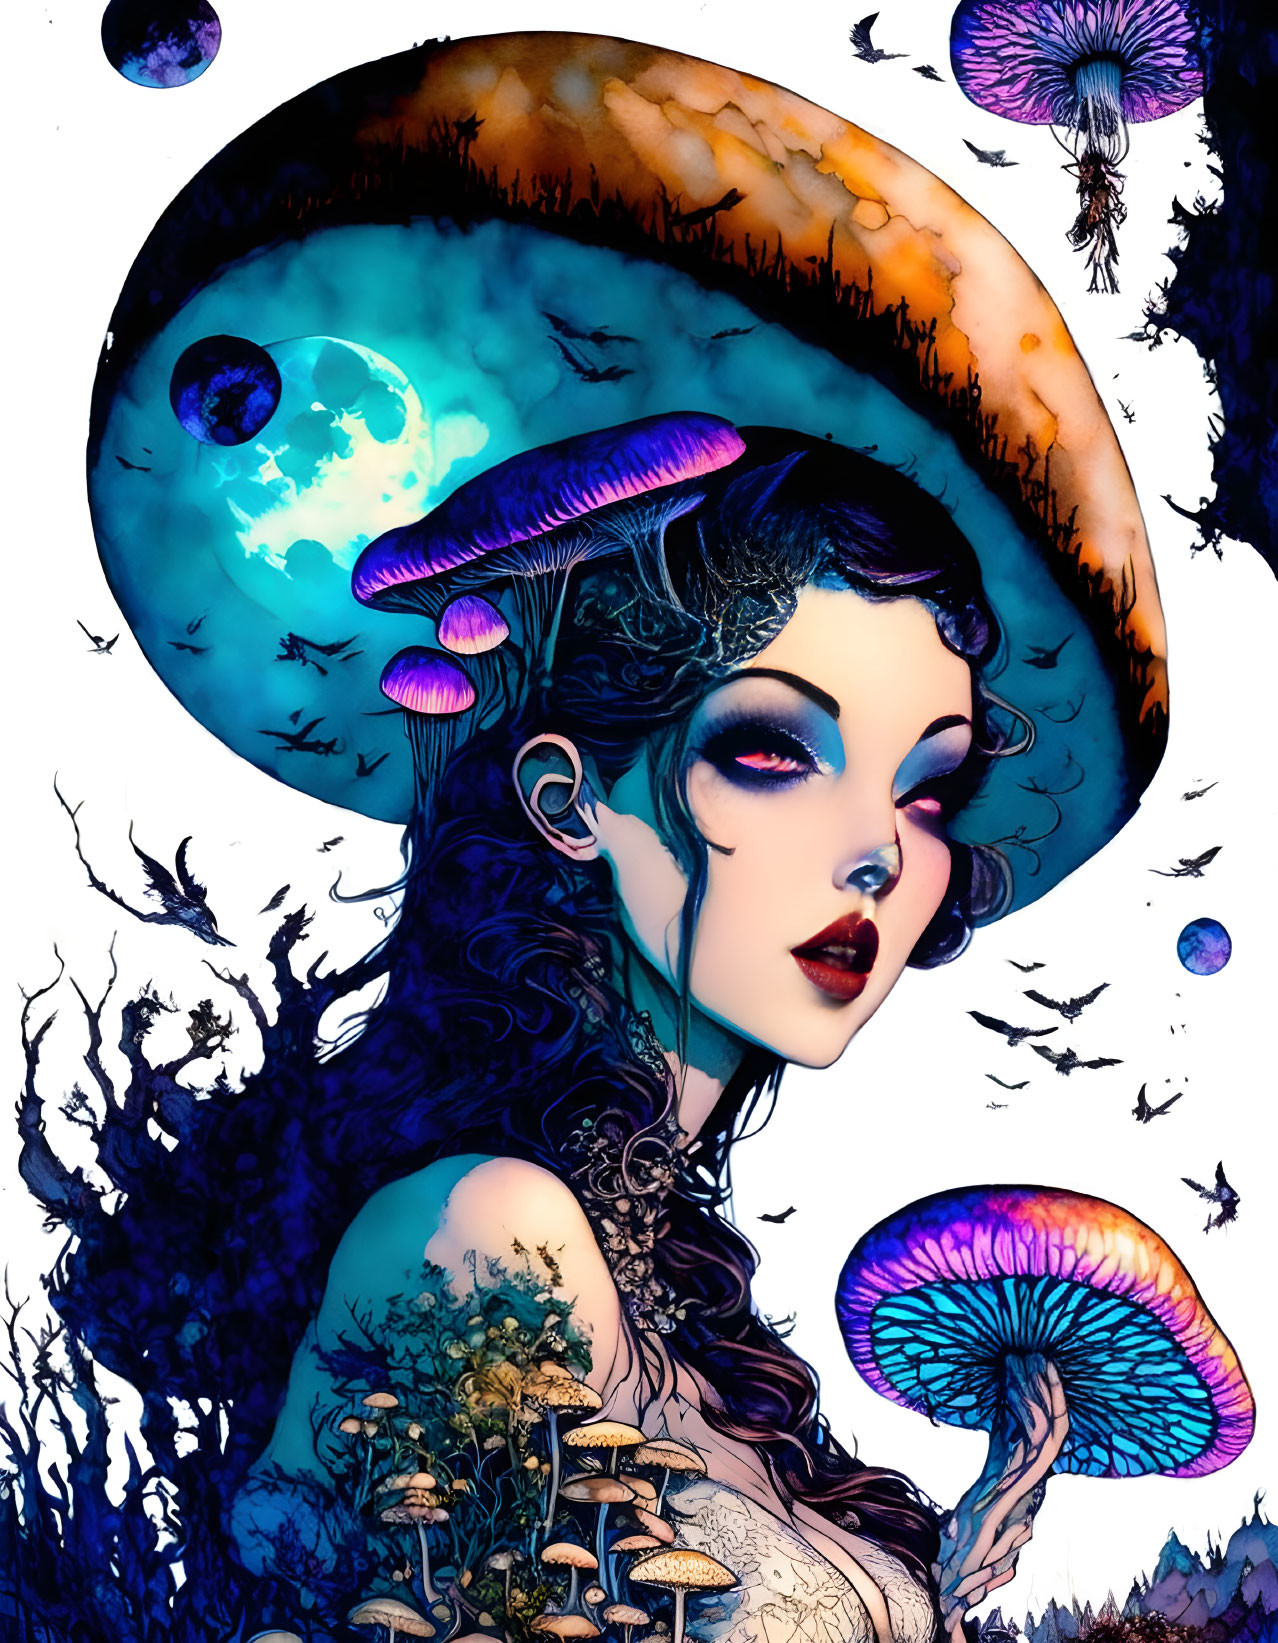 Illustrated woman with cosmic mushroom hat under full moon and floating orbs